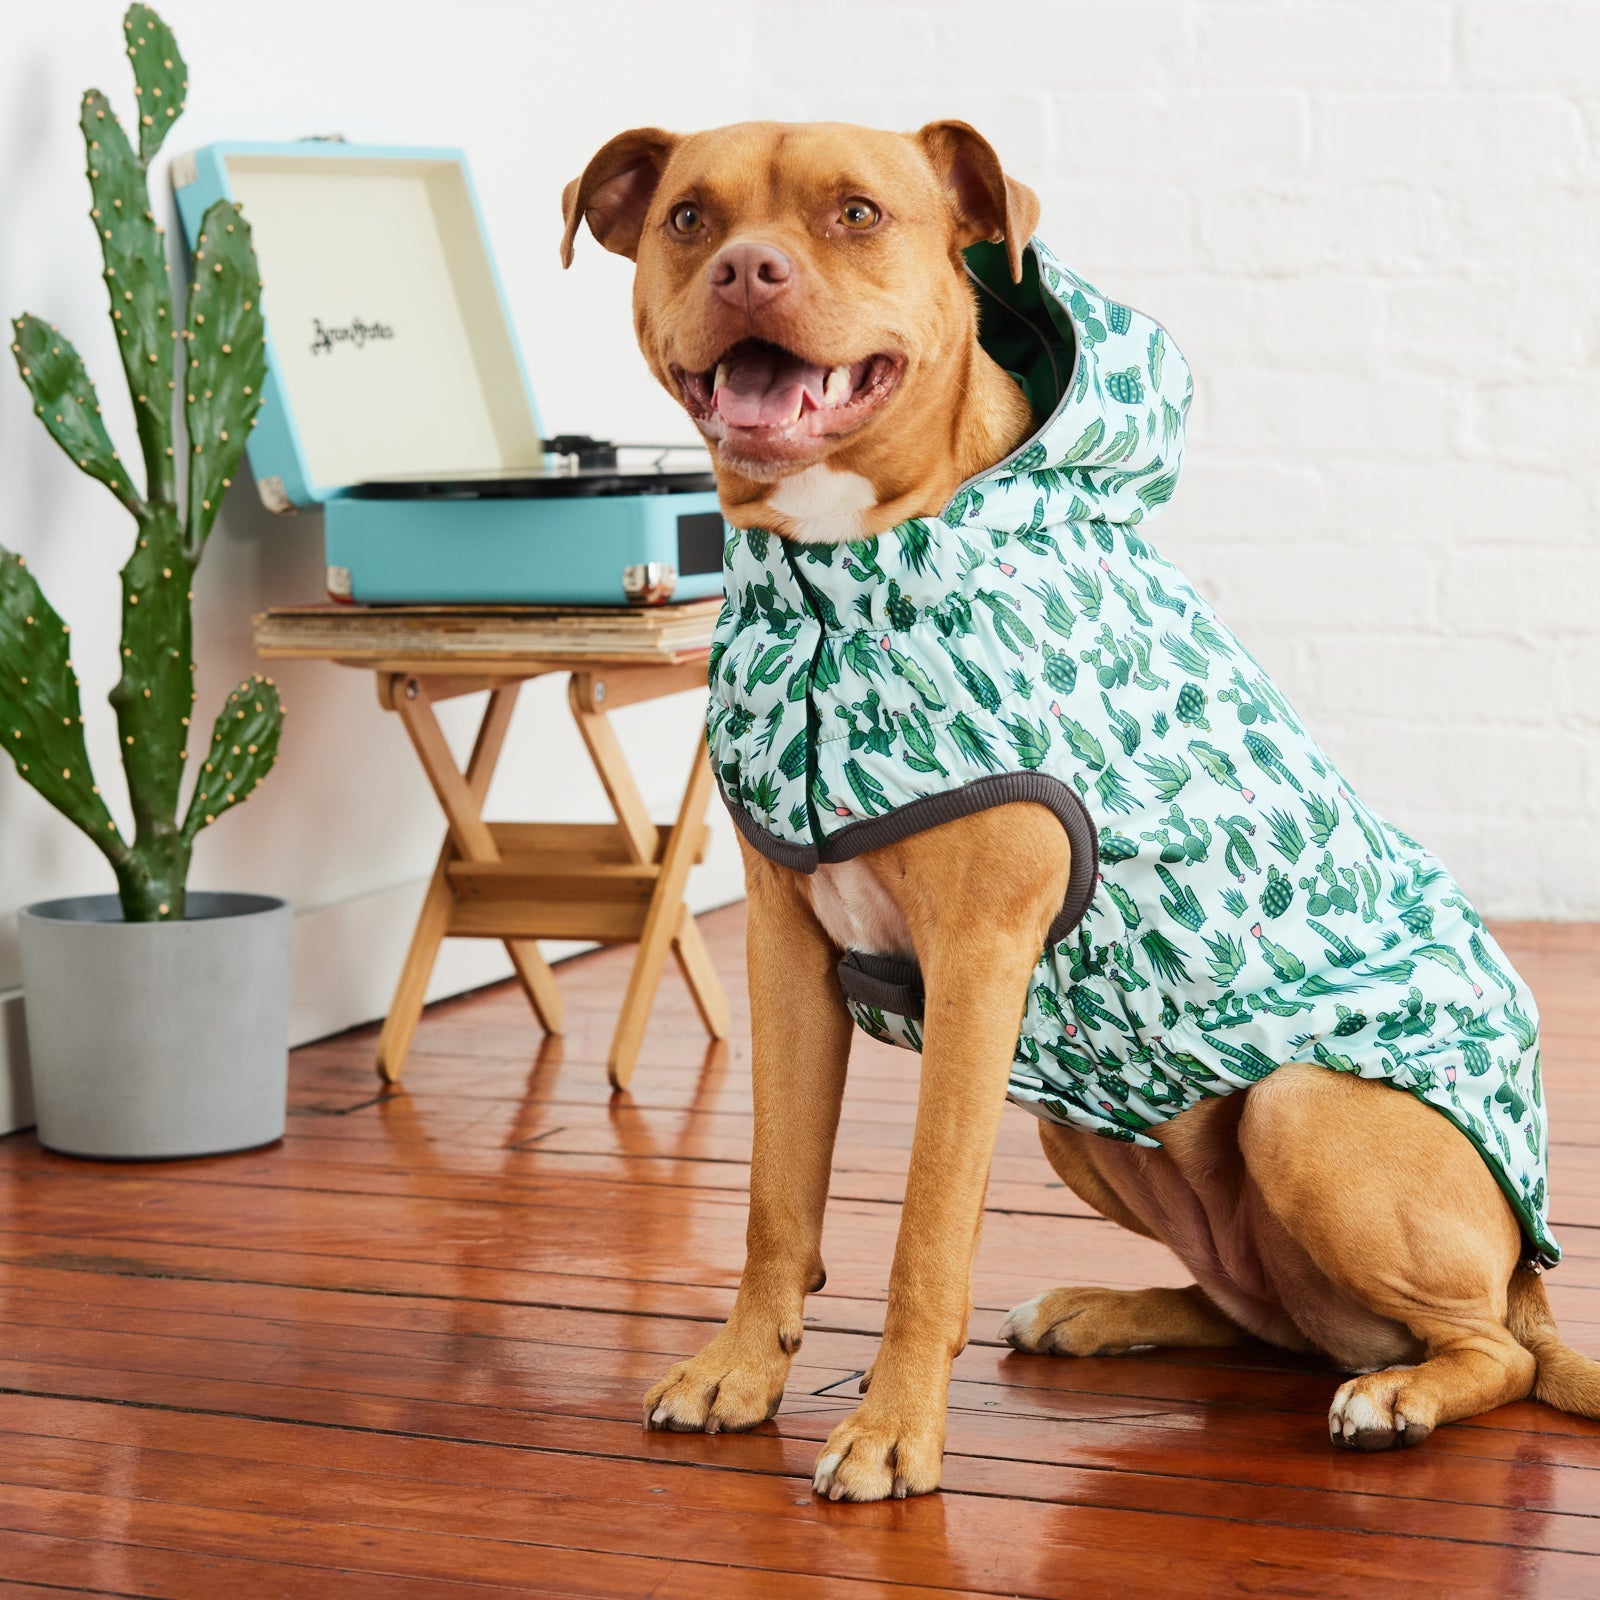 A golden pit bull-type dog wearing a light blue and green cactus print raincoat, sitting in a room with wood floors with a potted cactus and a vintage record player in the background 